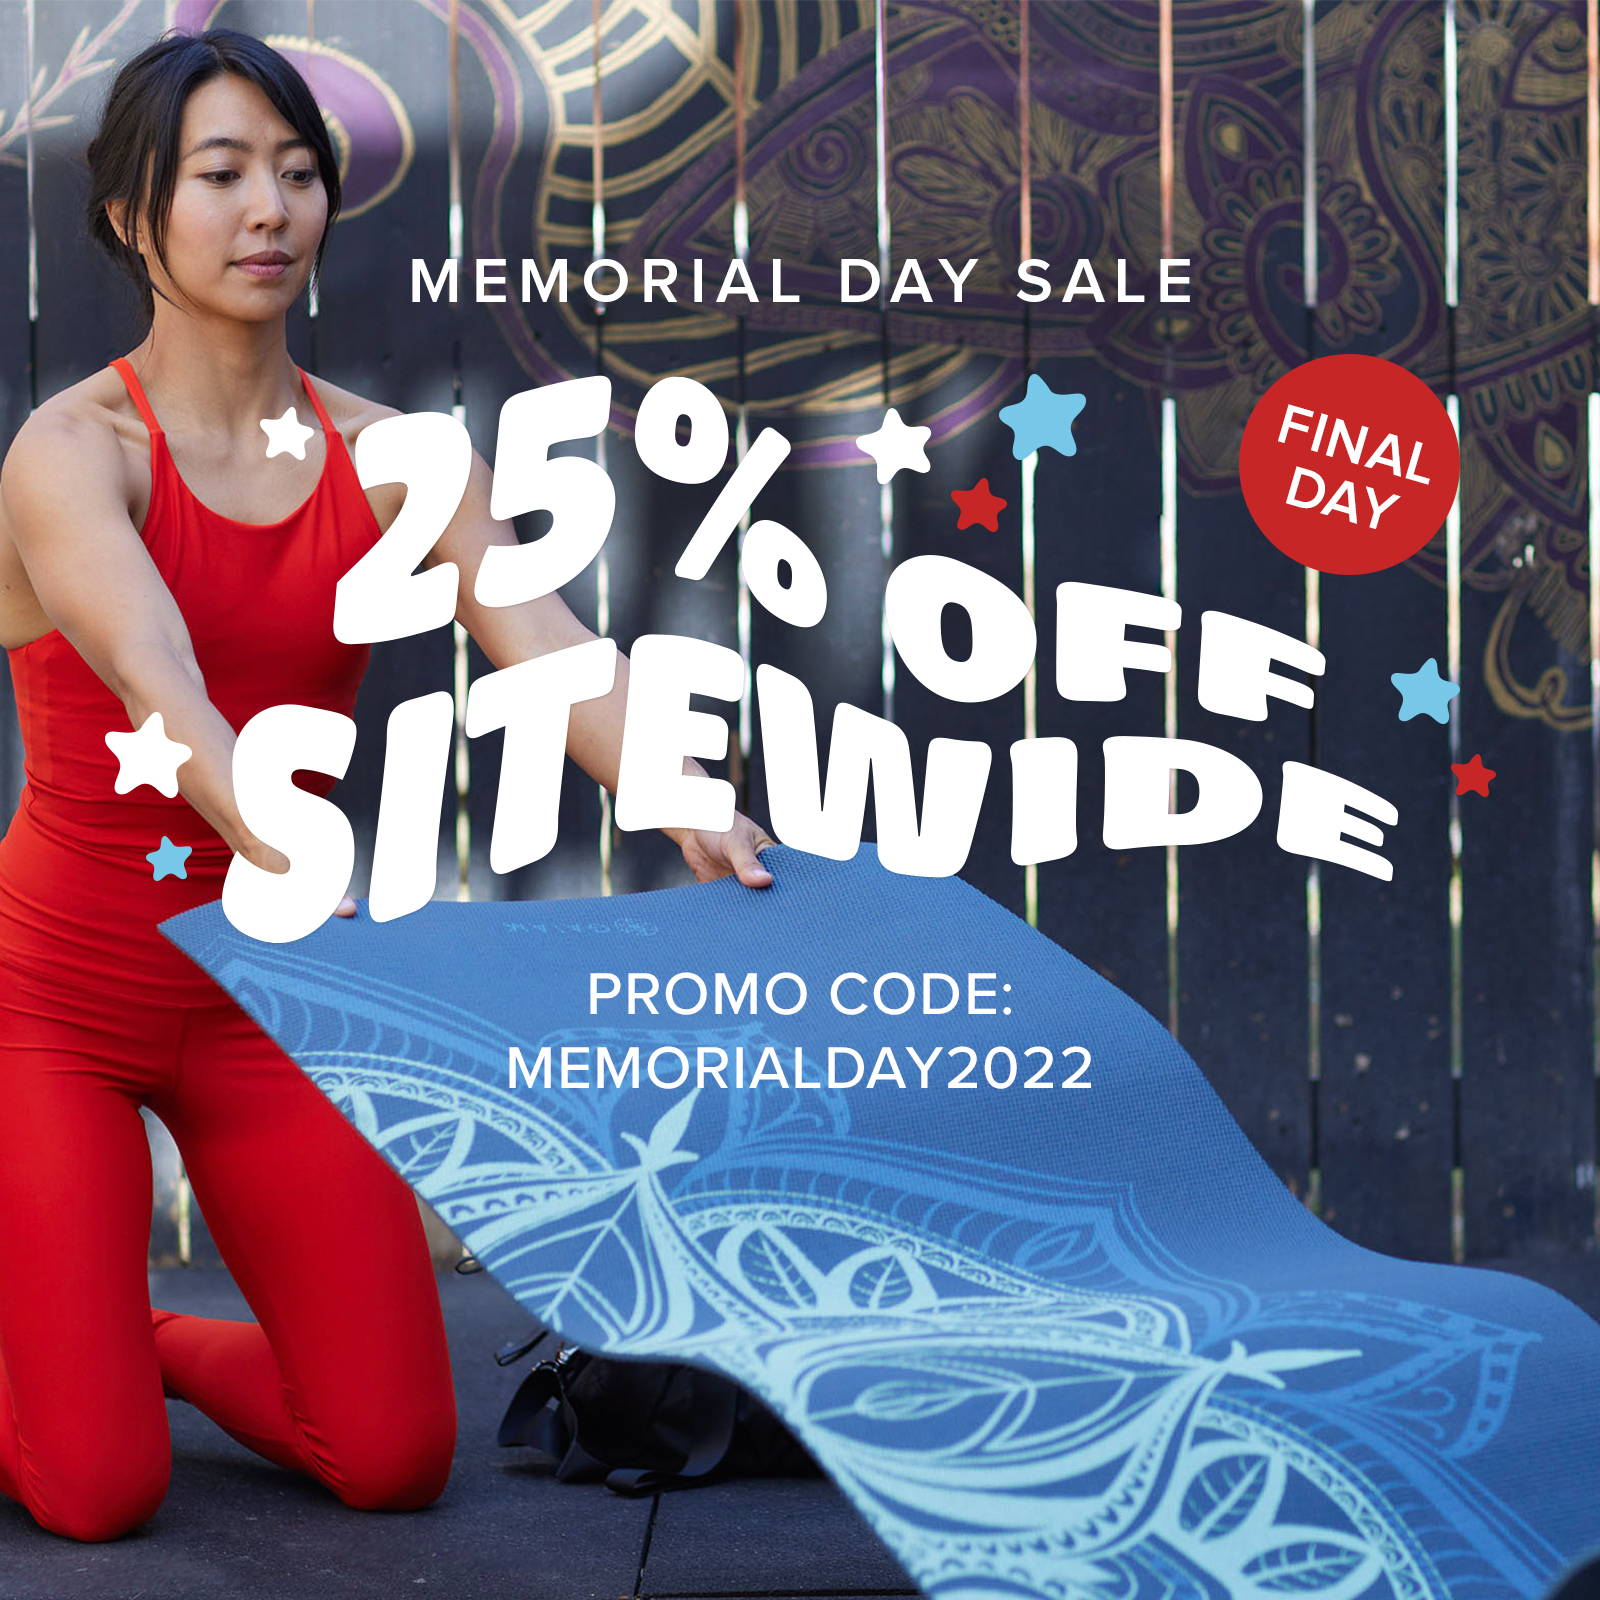 Final Day 25% Off Sitewide